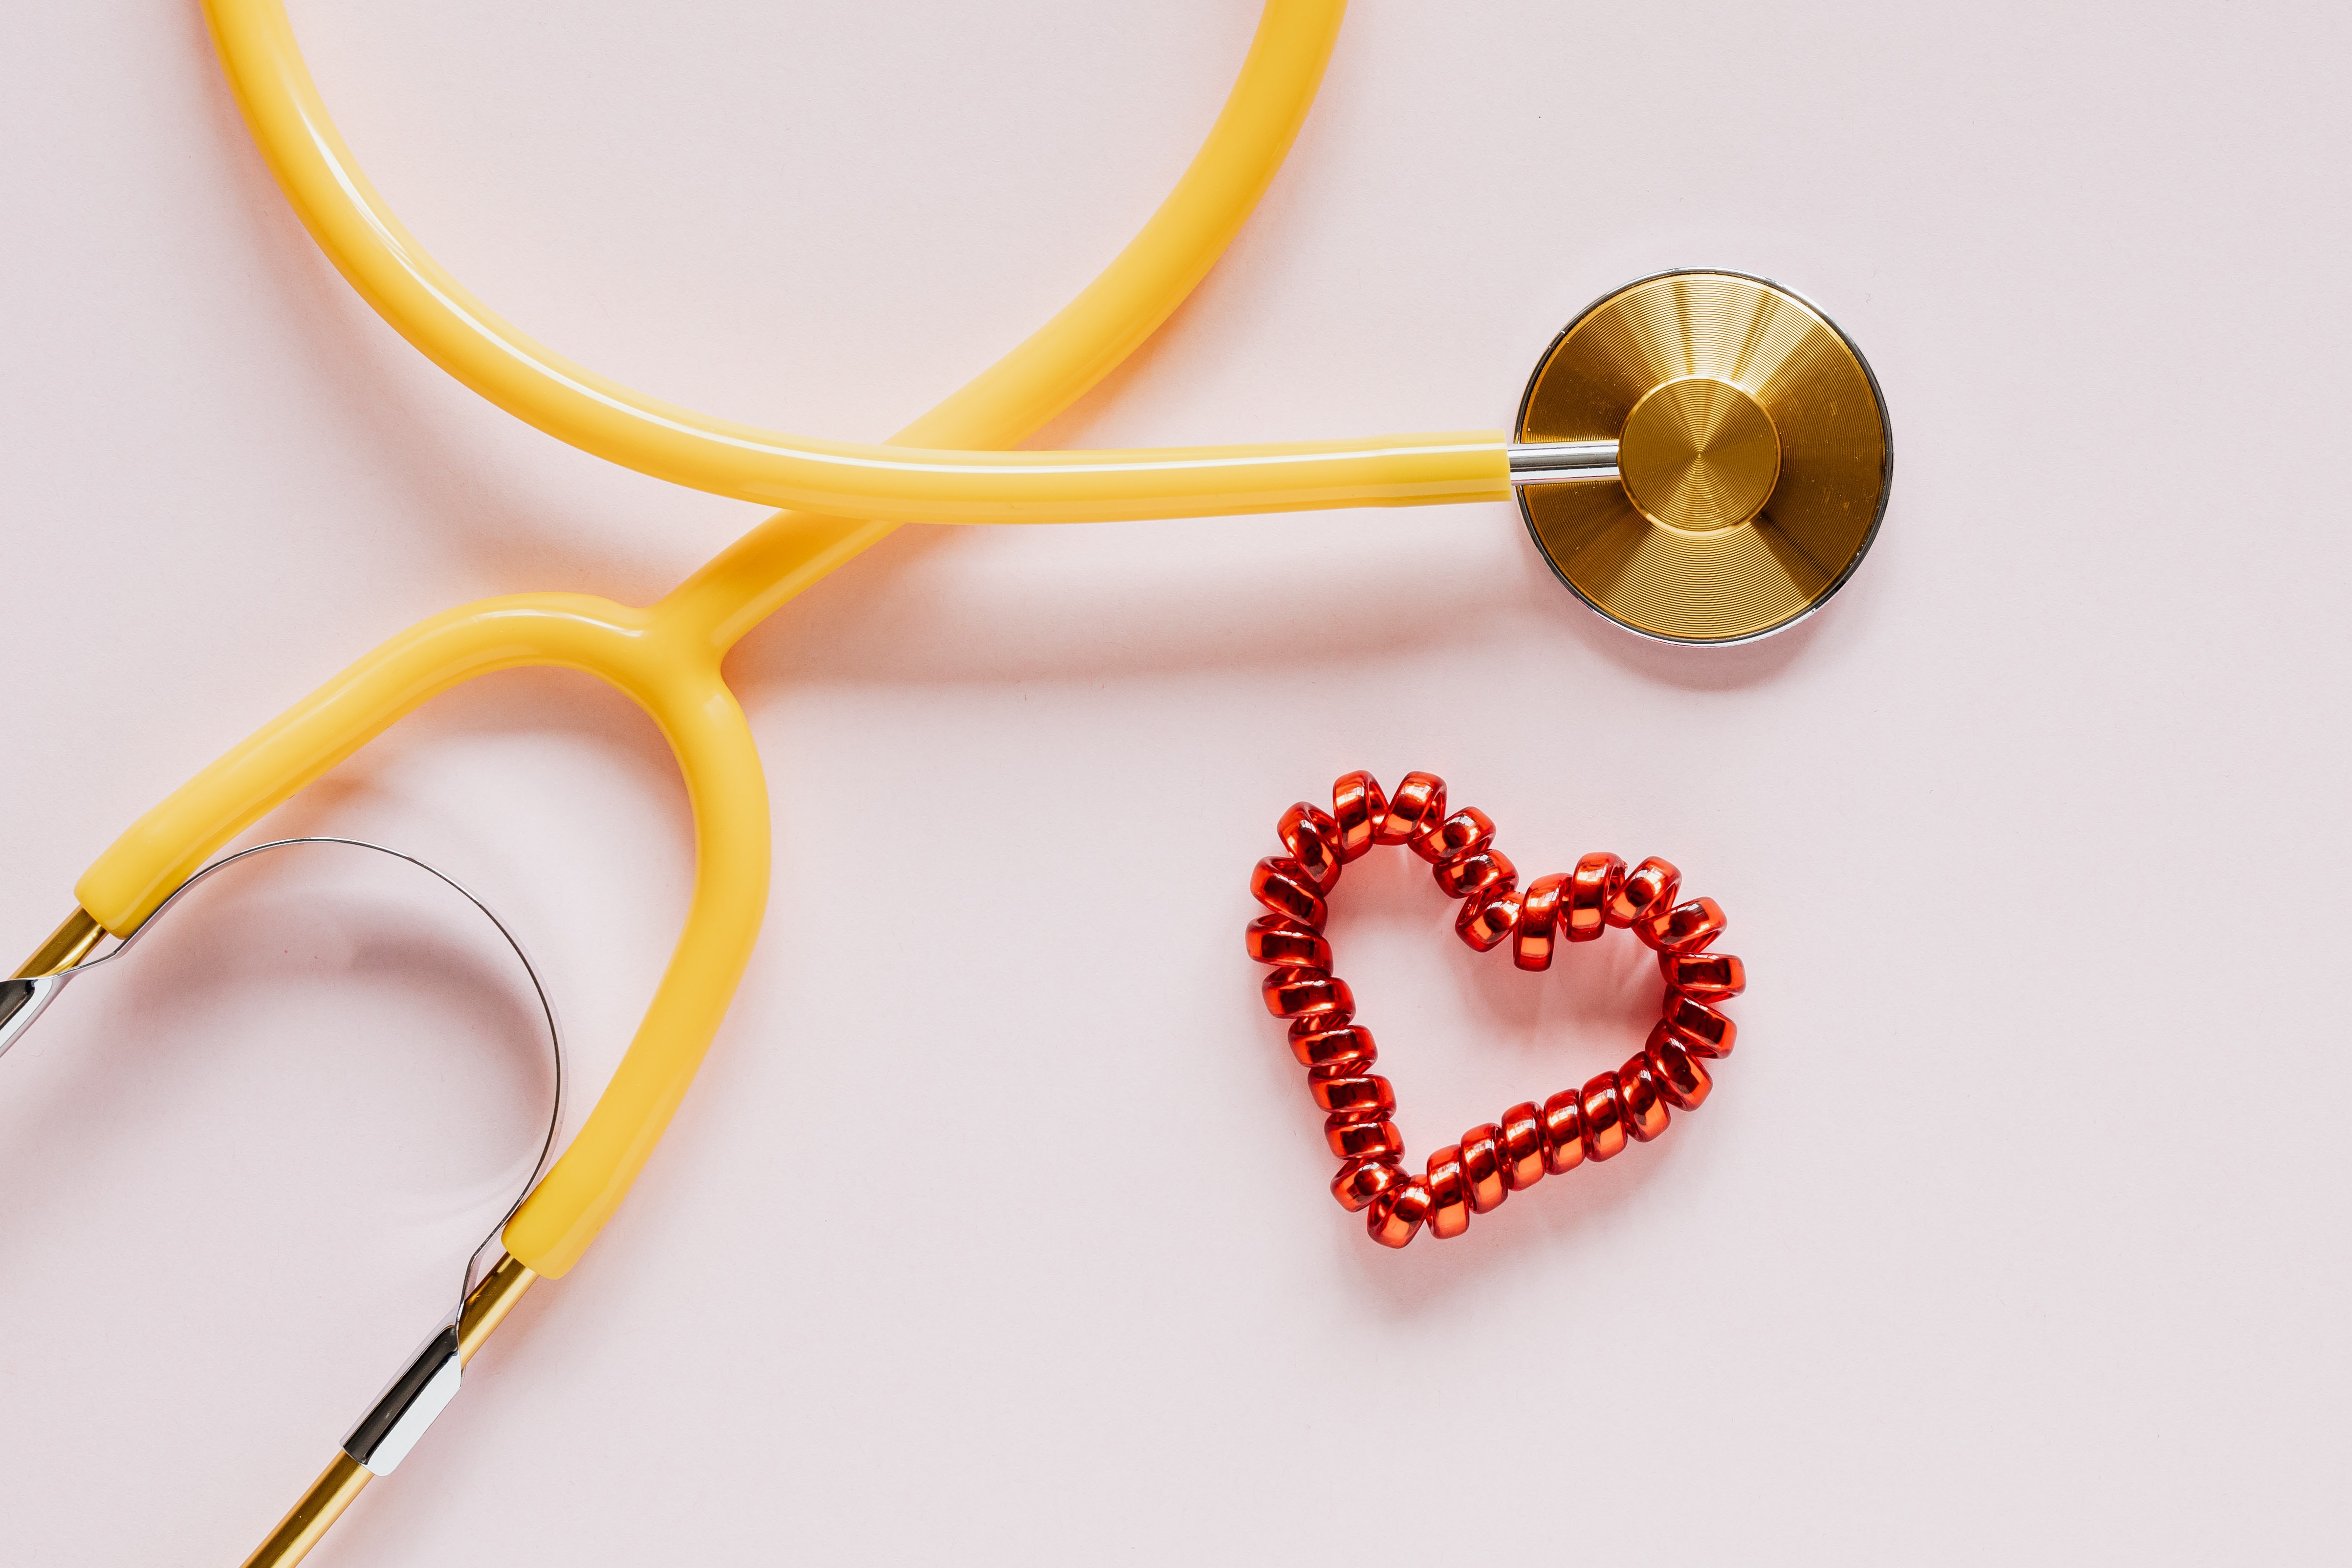 stethoscope with a stylized red heart